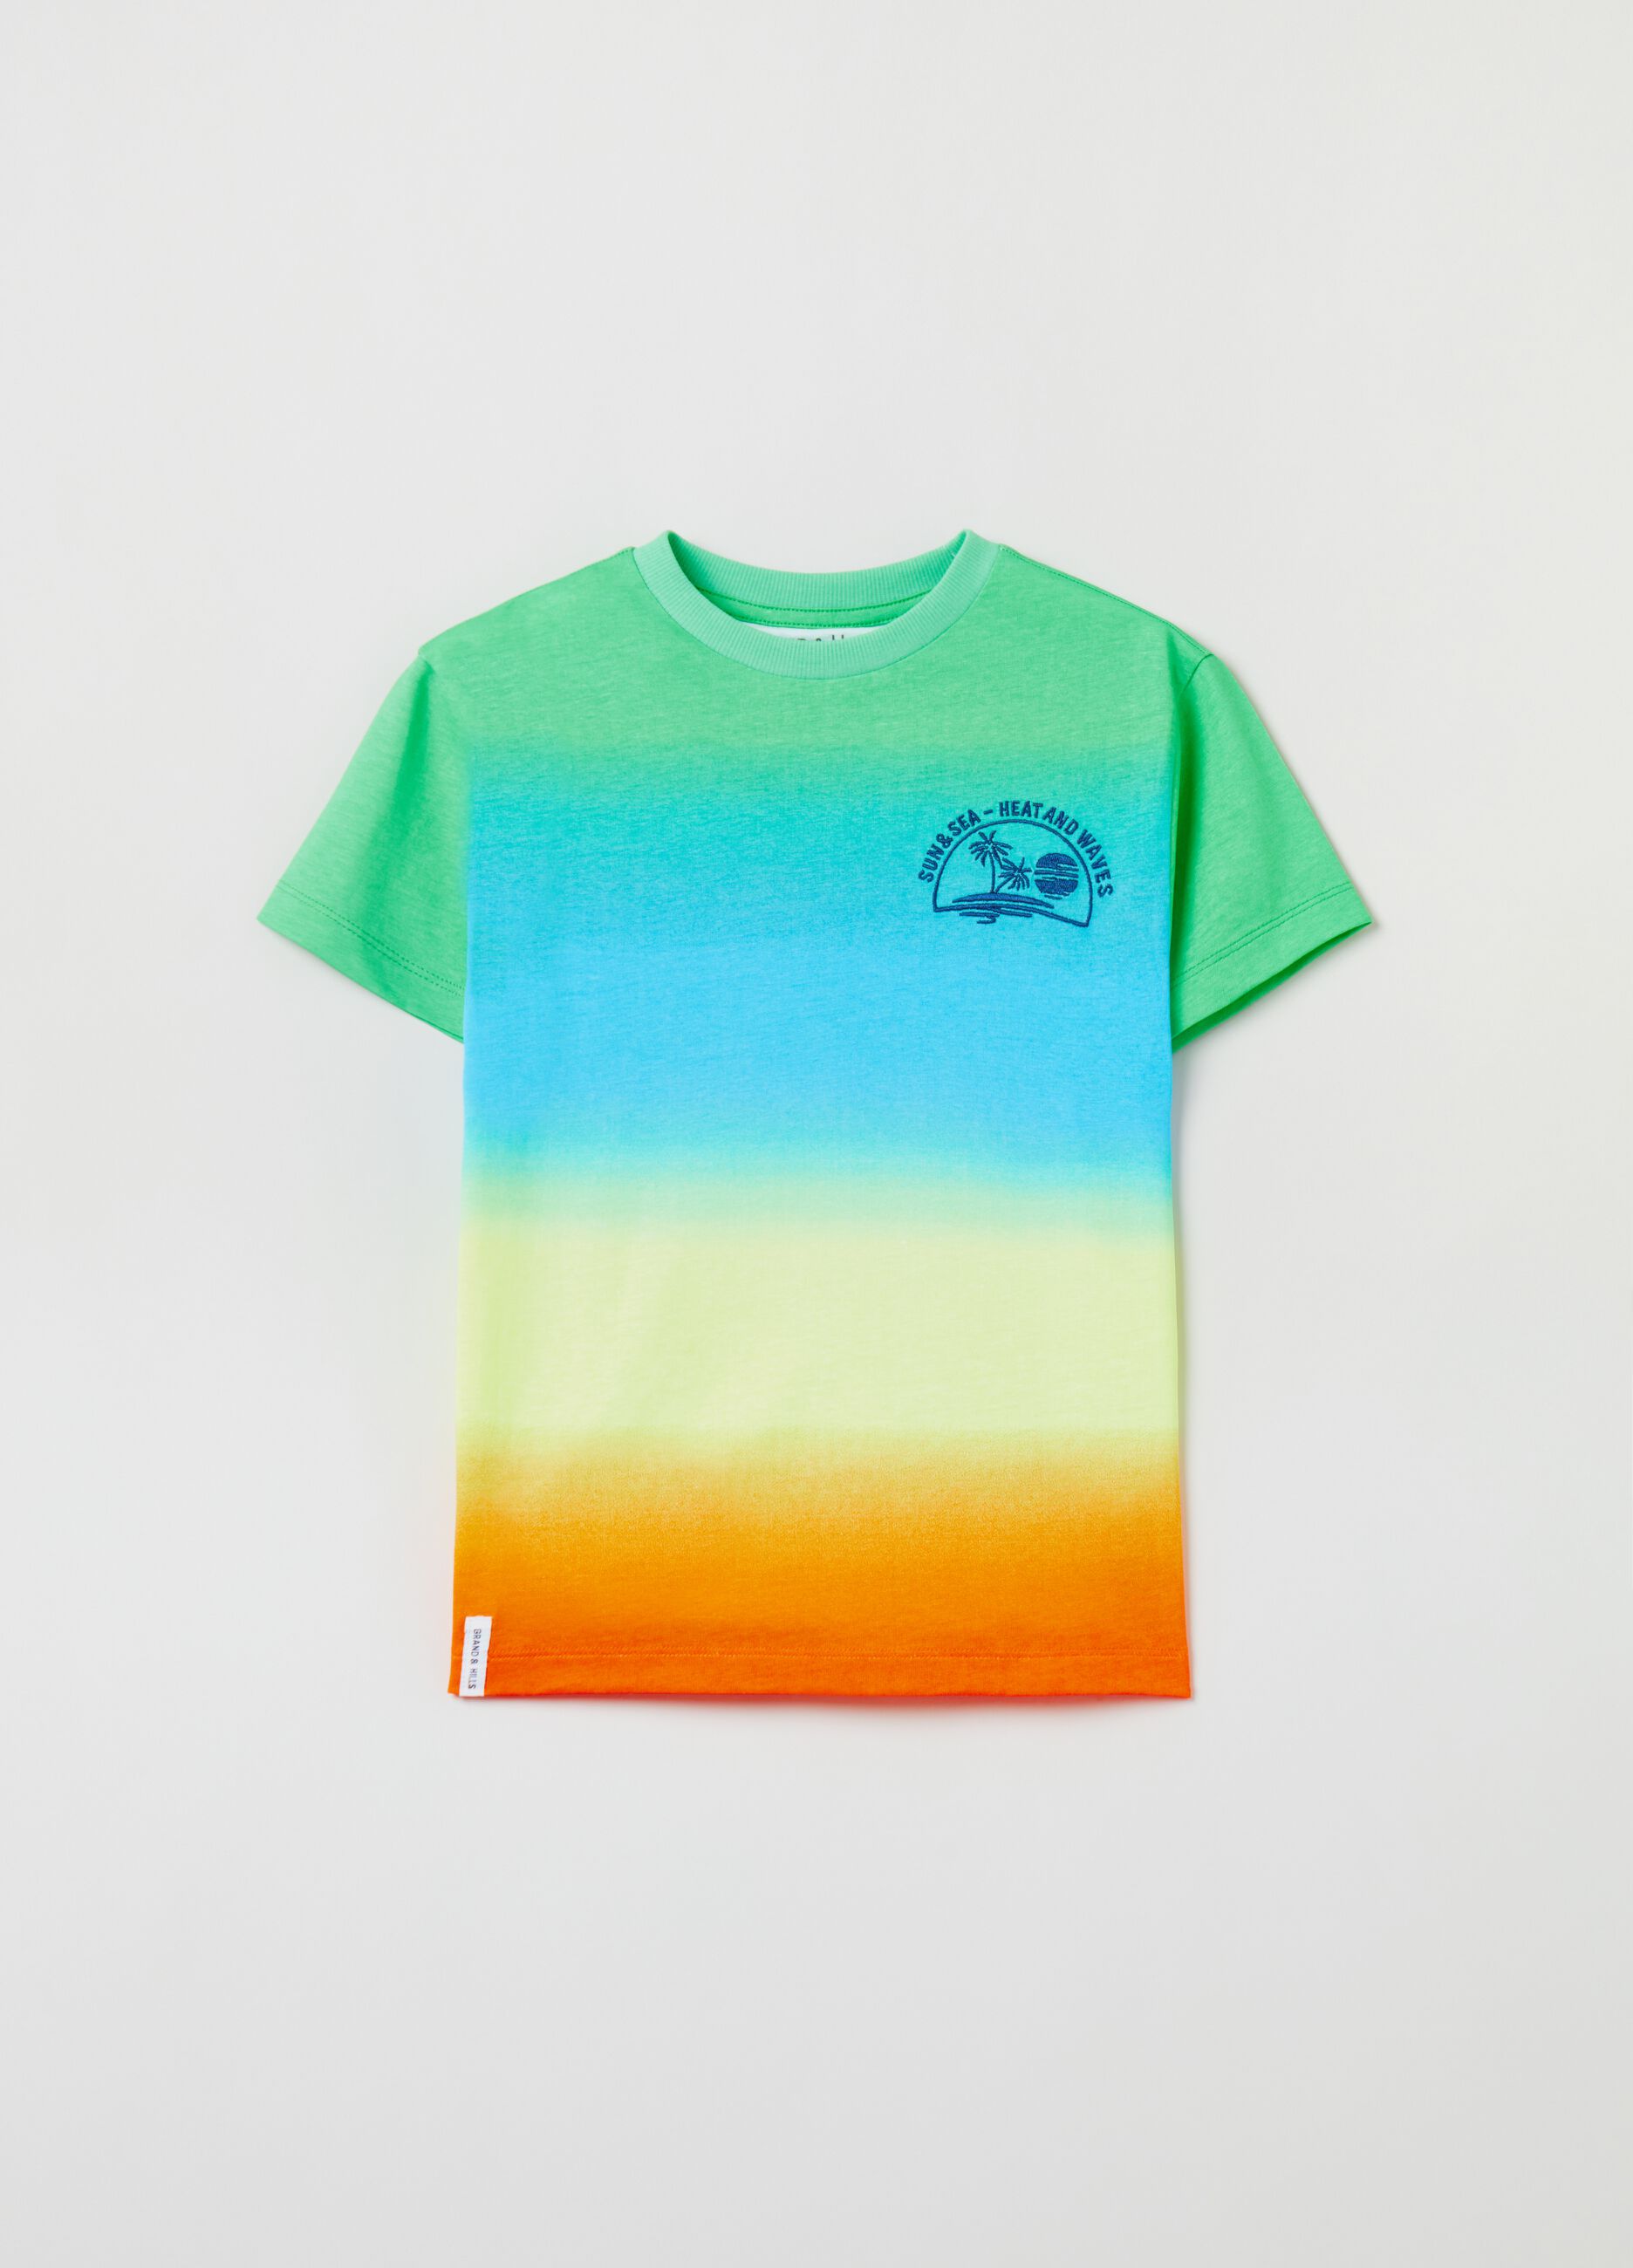 Grand&Hills dip-dye T-shirt with embroidery